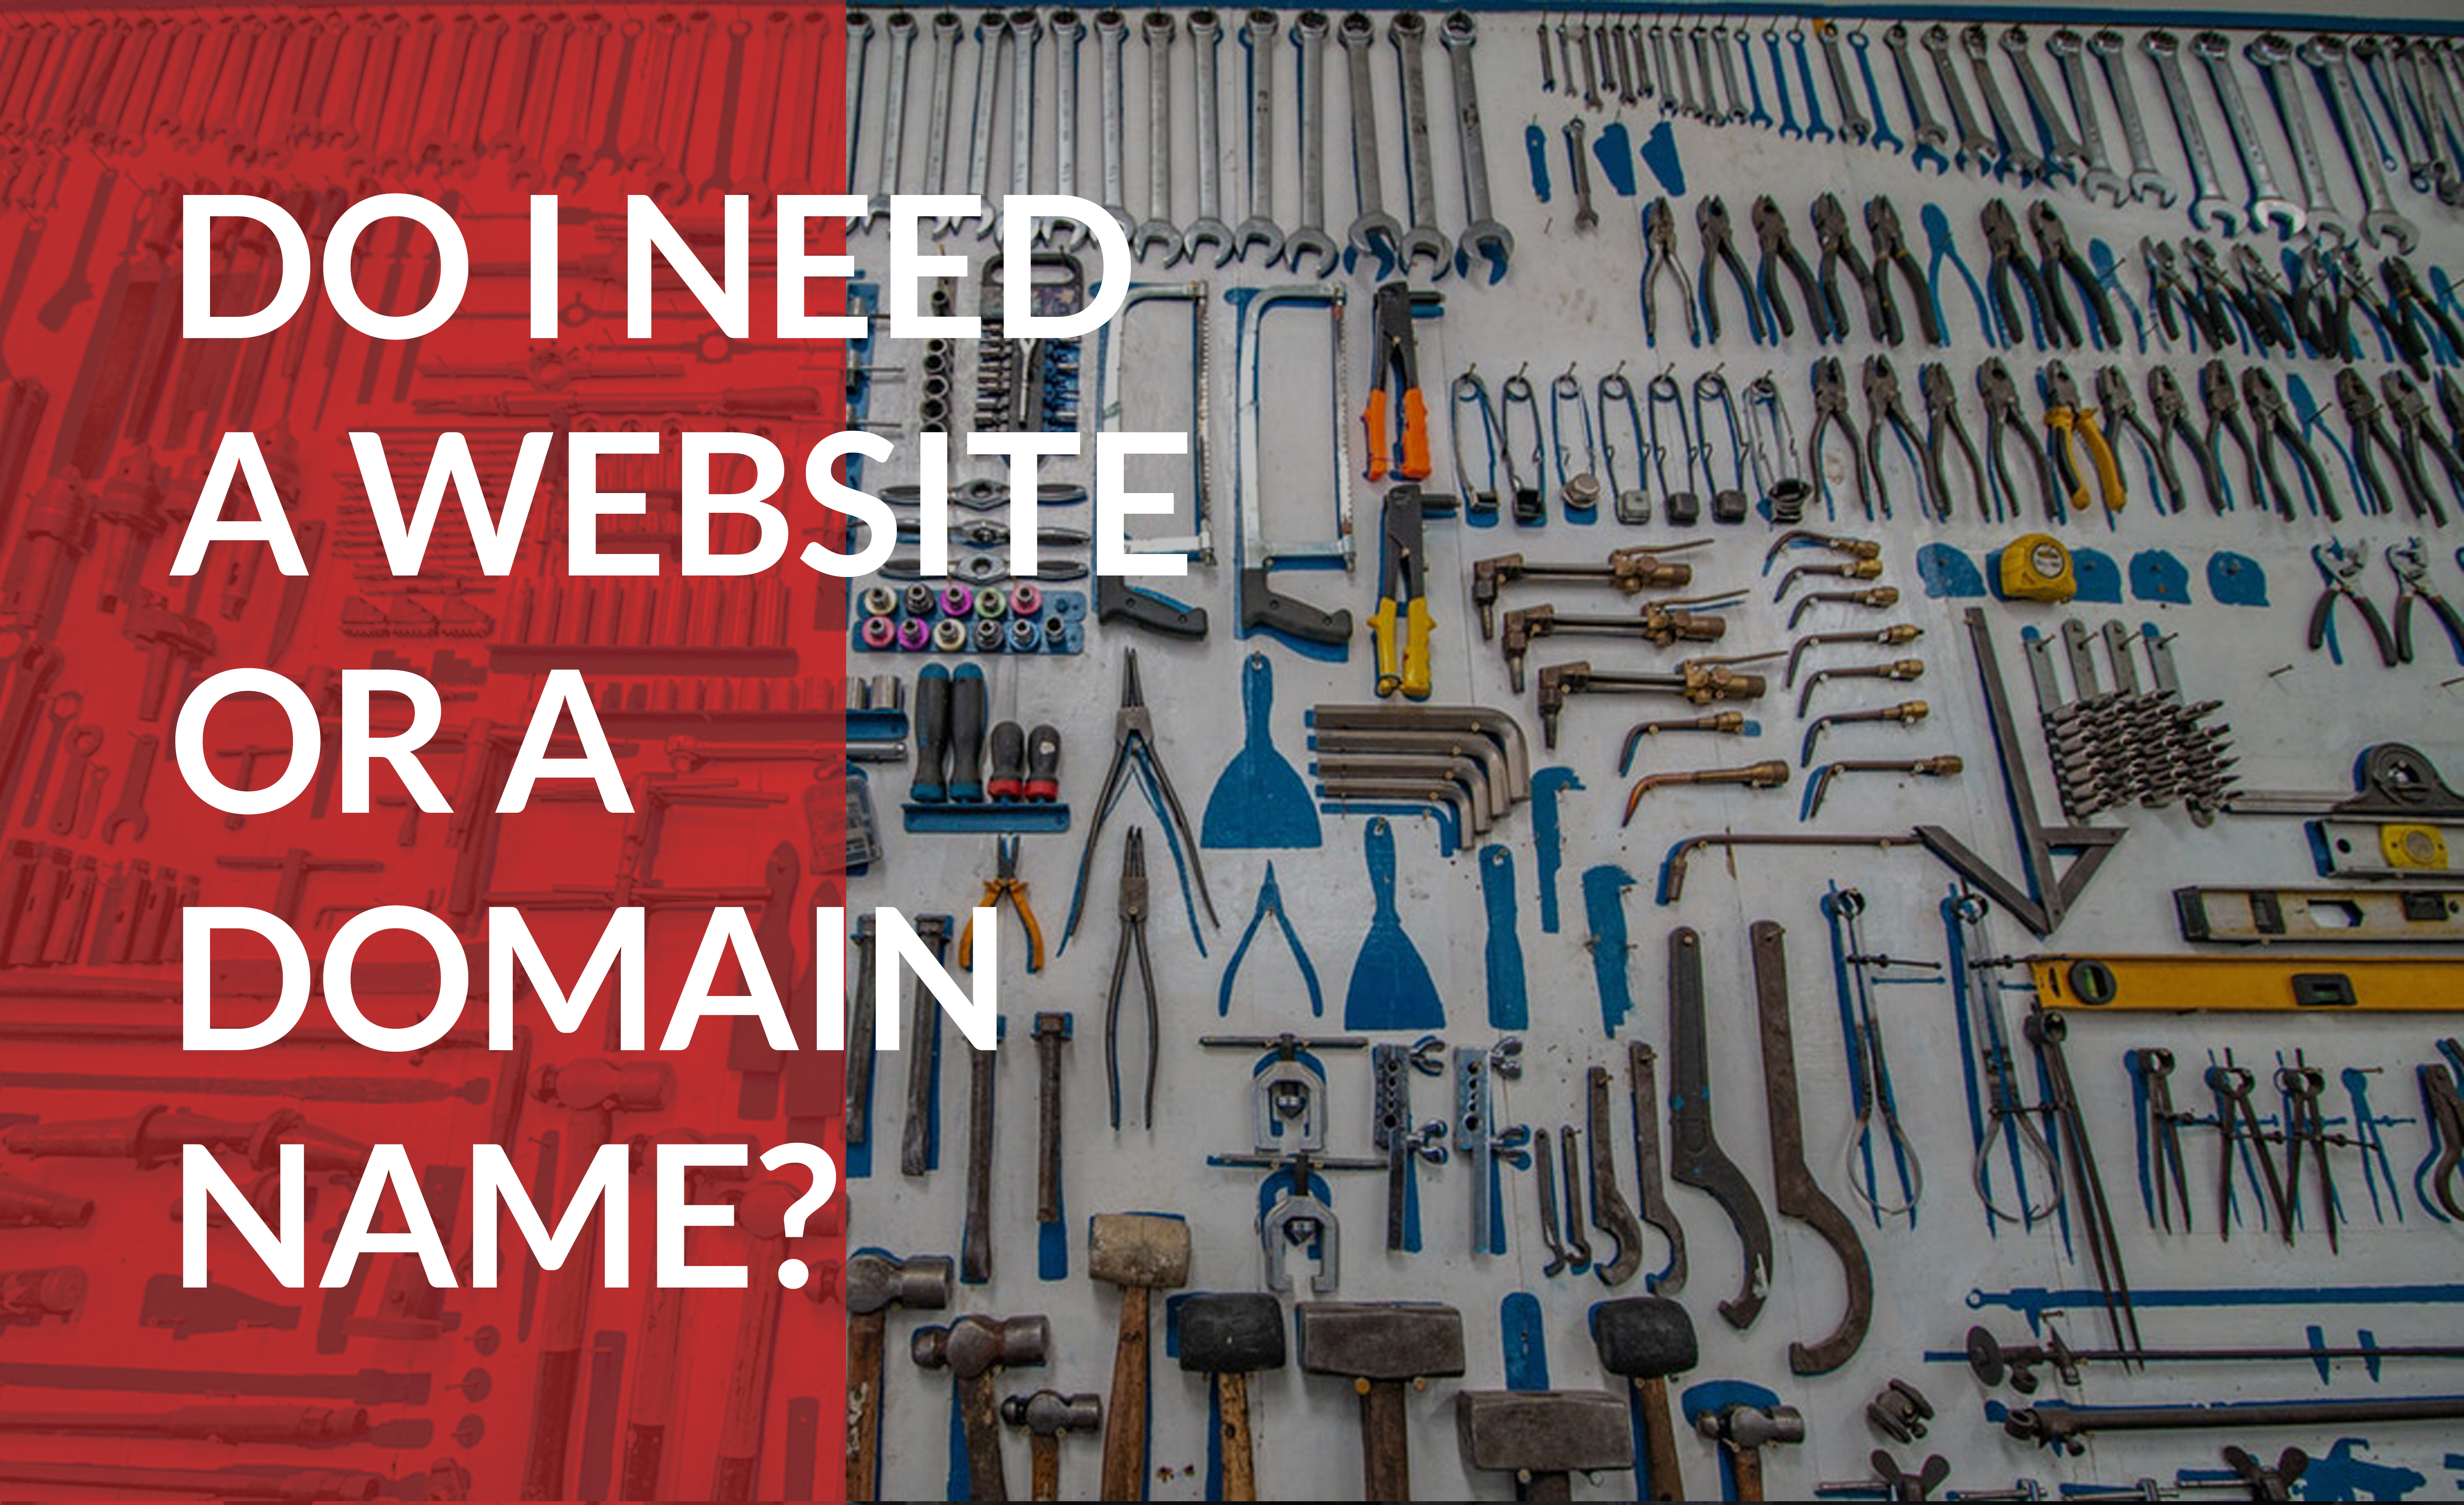 Find out the differences between domain names and websites.